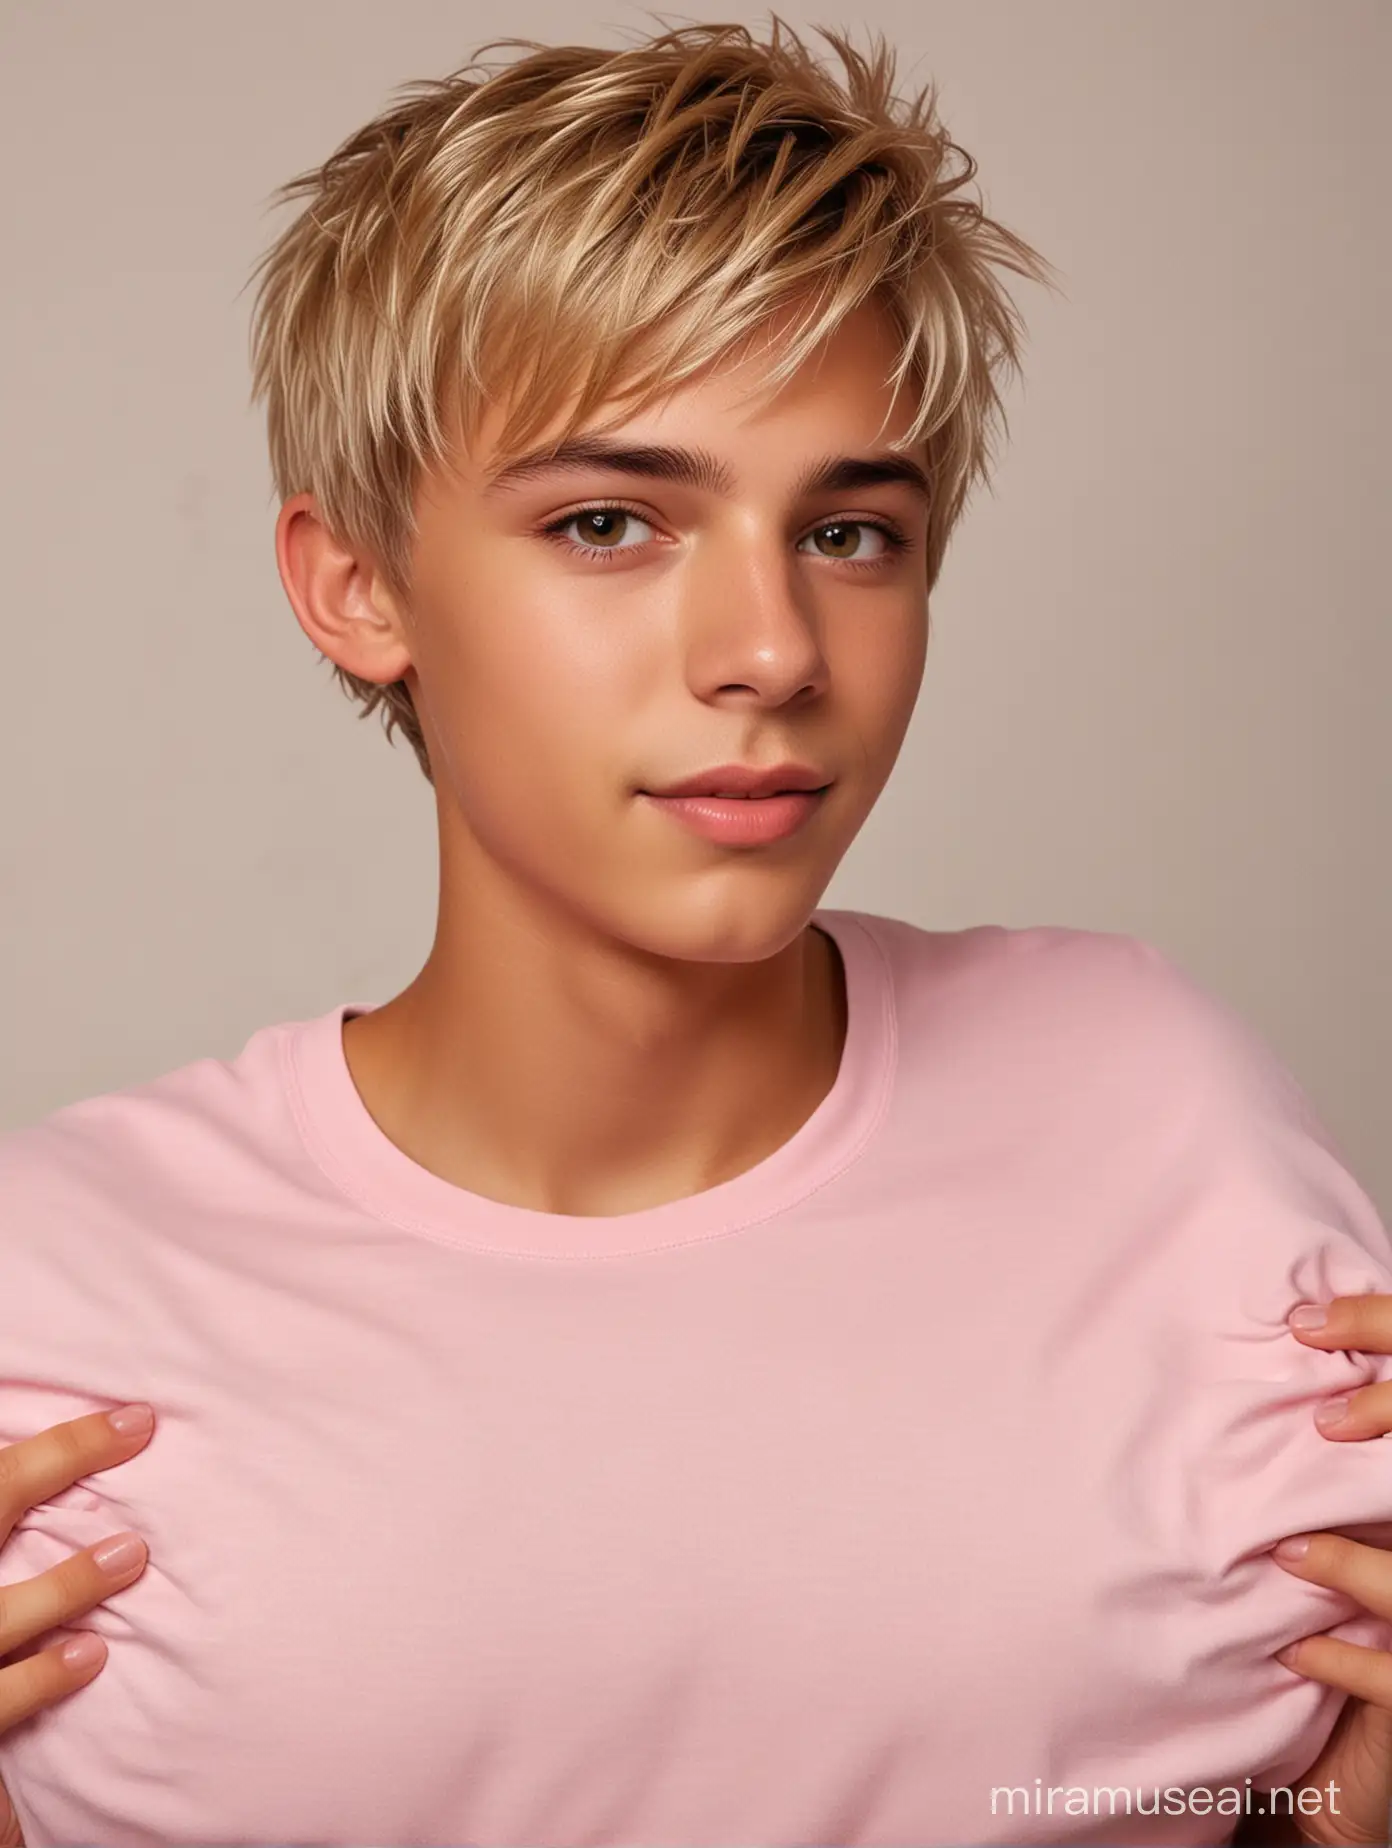 blond wet hair , Very handsome,,boy,boy,17 years old,(beautiful vivid ocher-Brown eyes with 3D light reflection),back,athletic figure,close-up of hands AND fingers,tanned,blond hair,athlete,golden blonde short cut hair  with spiky hair, detailed skin and fine facial hair, wearing a light pink T-shirt, sitting on the bed, holding a large pillow in her arms, which she hugs.